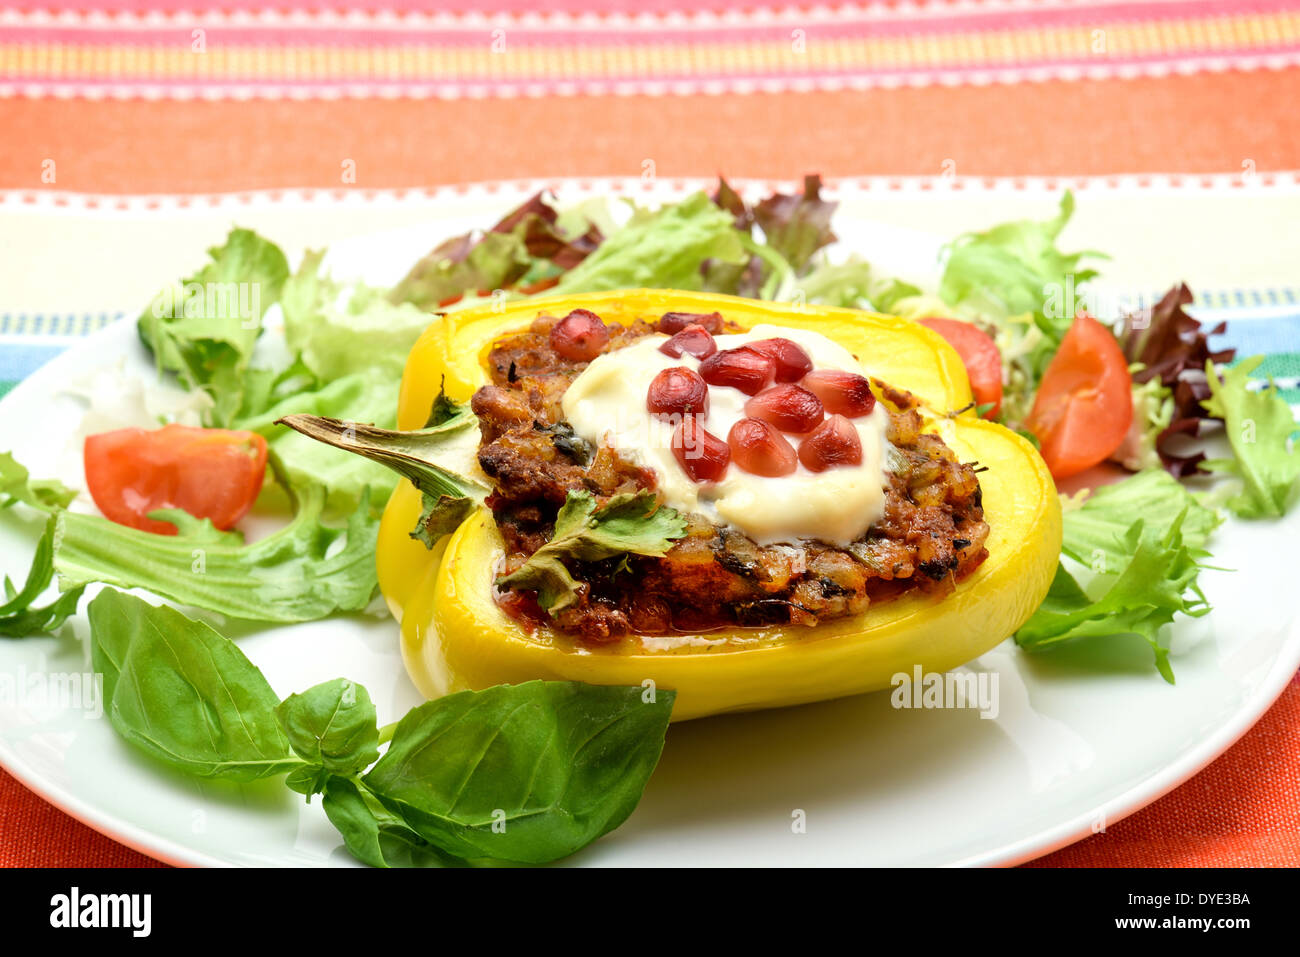 A yellow bell pepper with a savoury stuffing that has been roasted in an oven then served on a white plate with a side salad Stock Photo